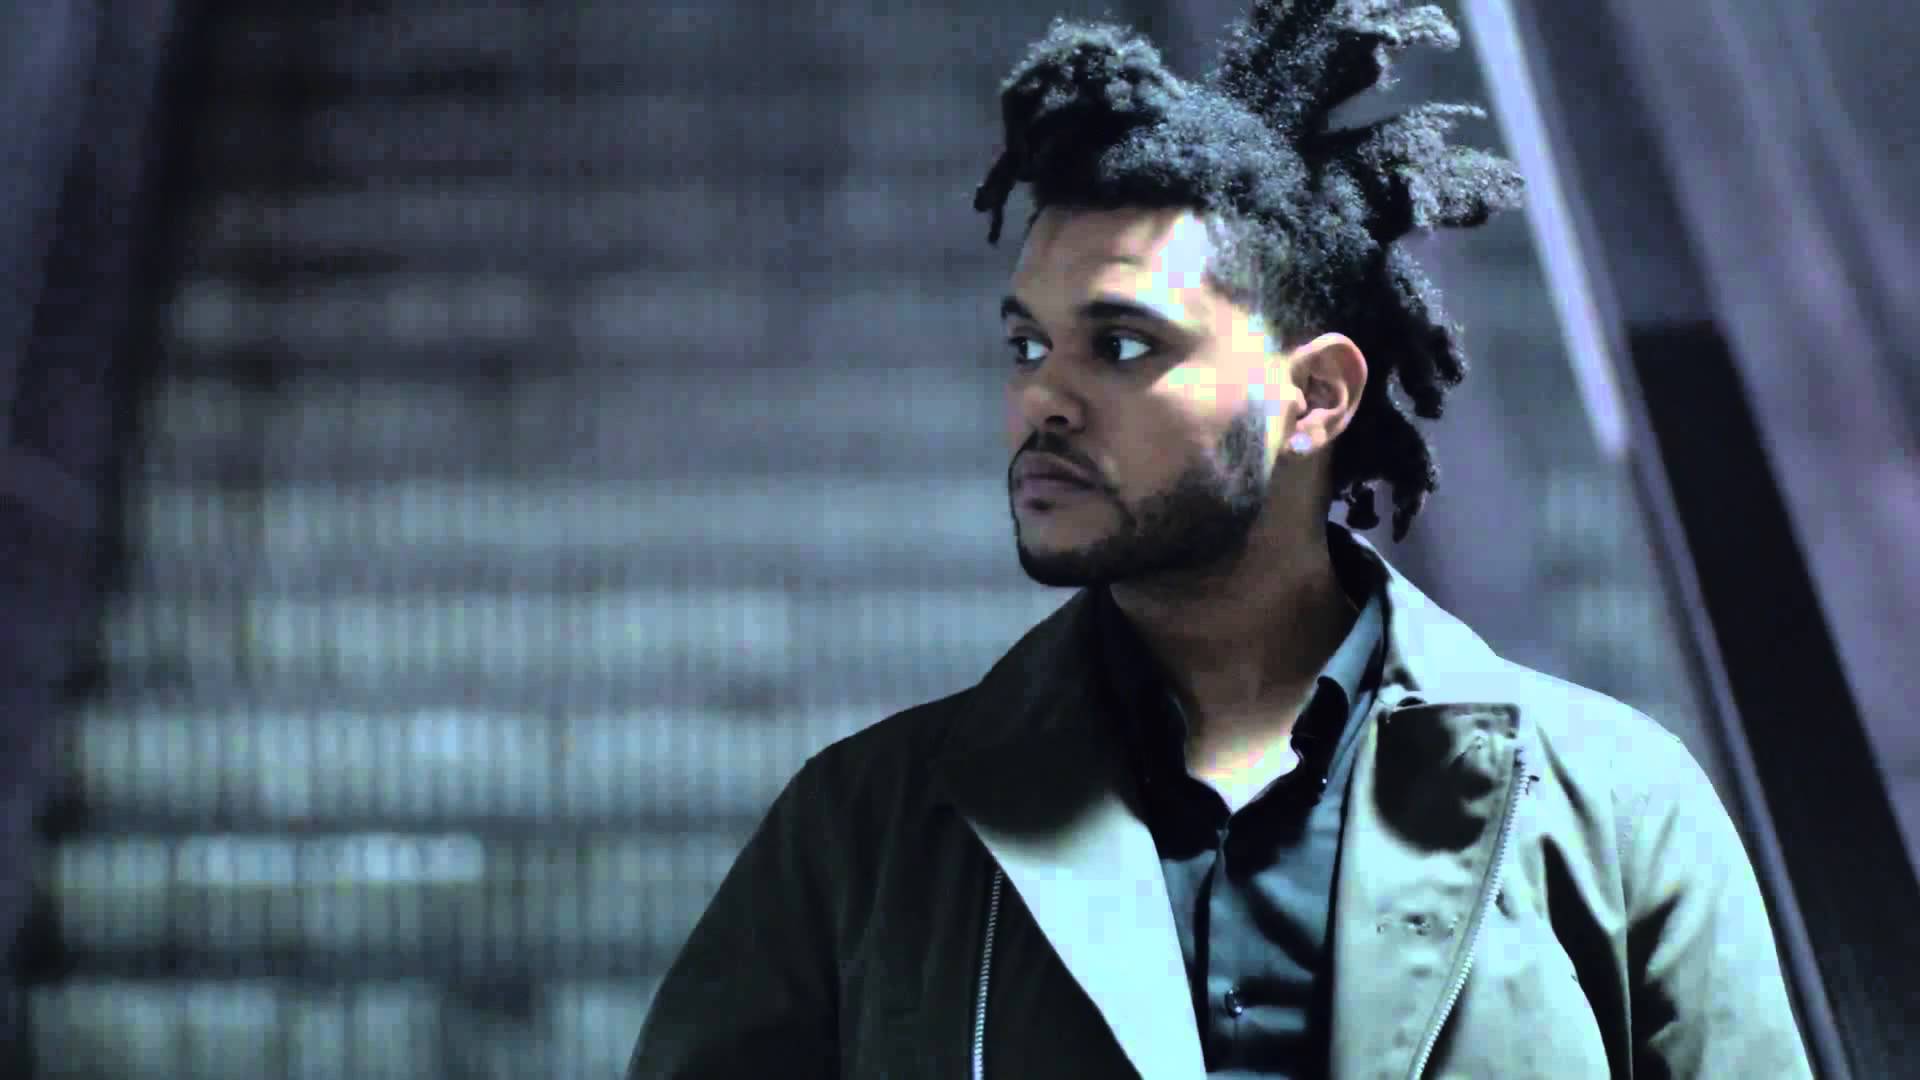 Come through the weeknd